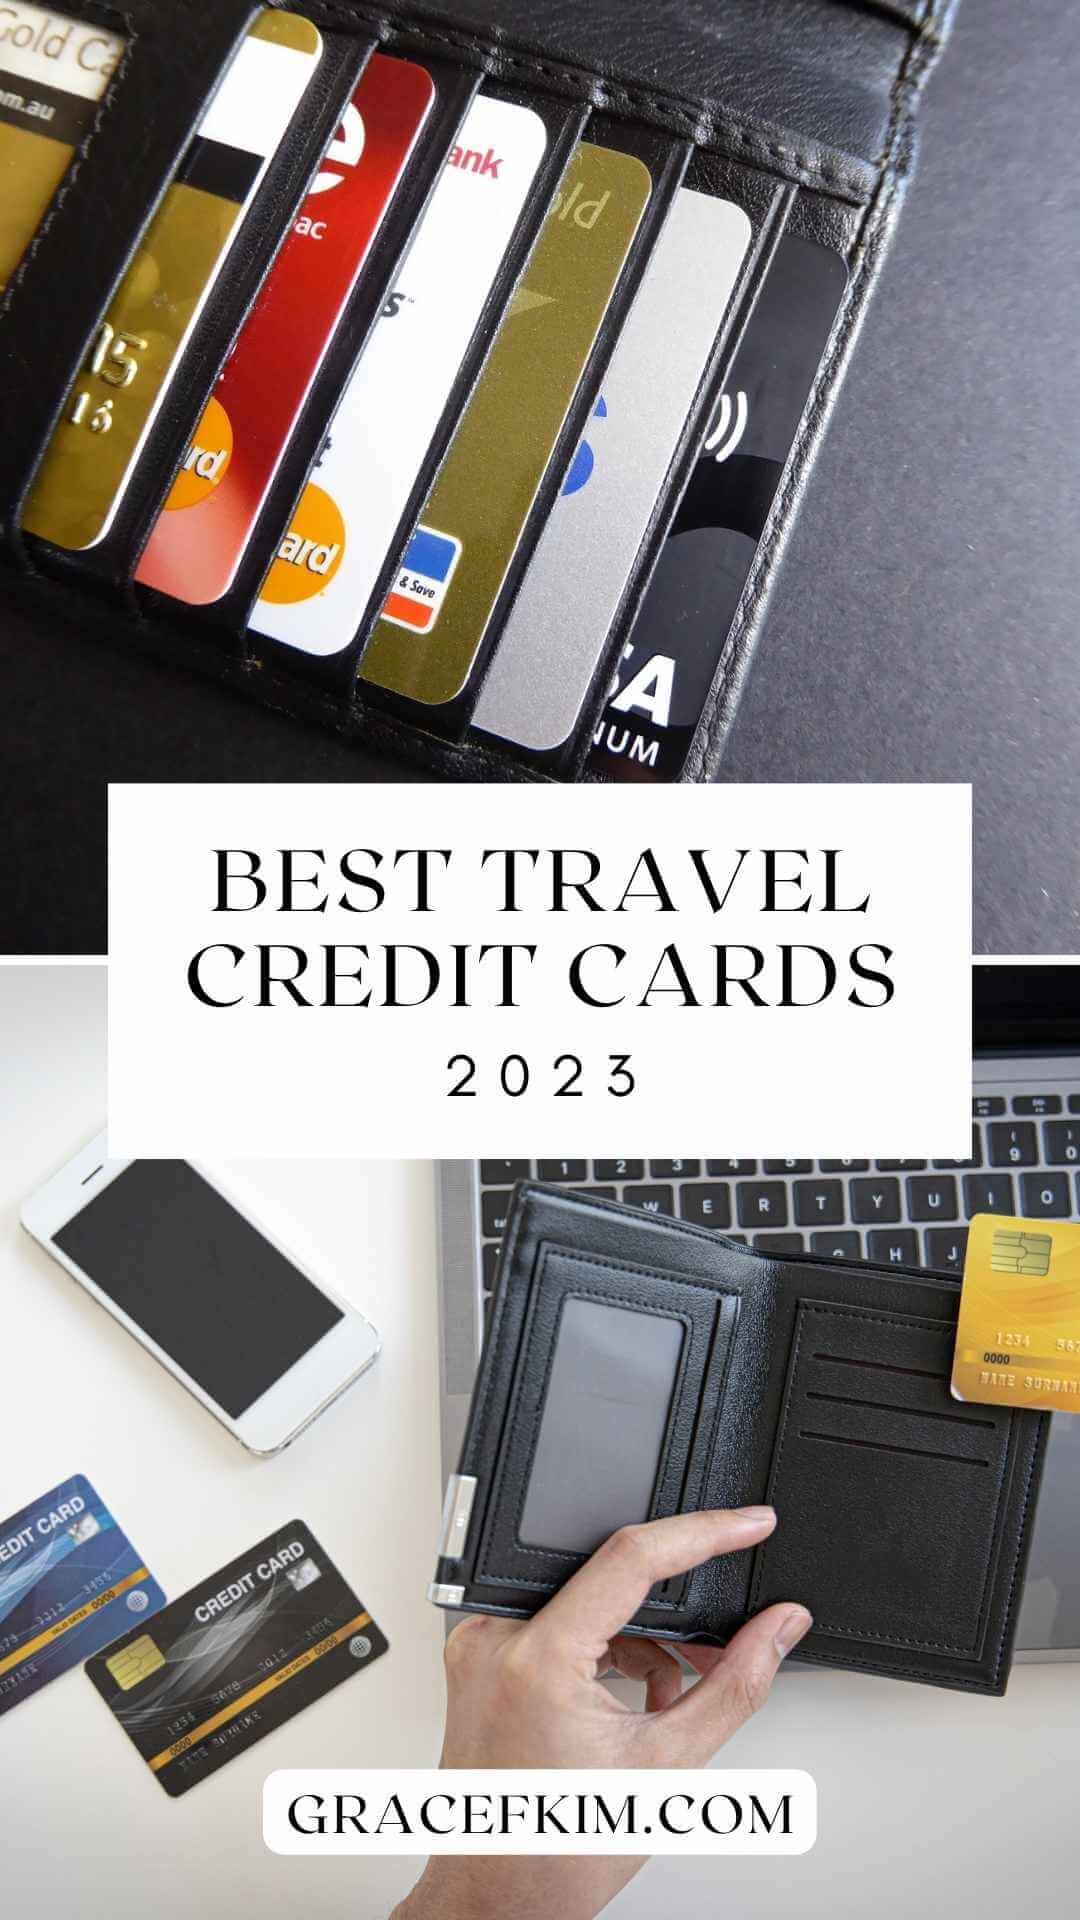 Reviewed Best Travel Credit Cards For Beginners in 2023